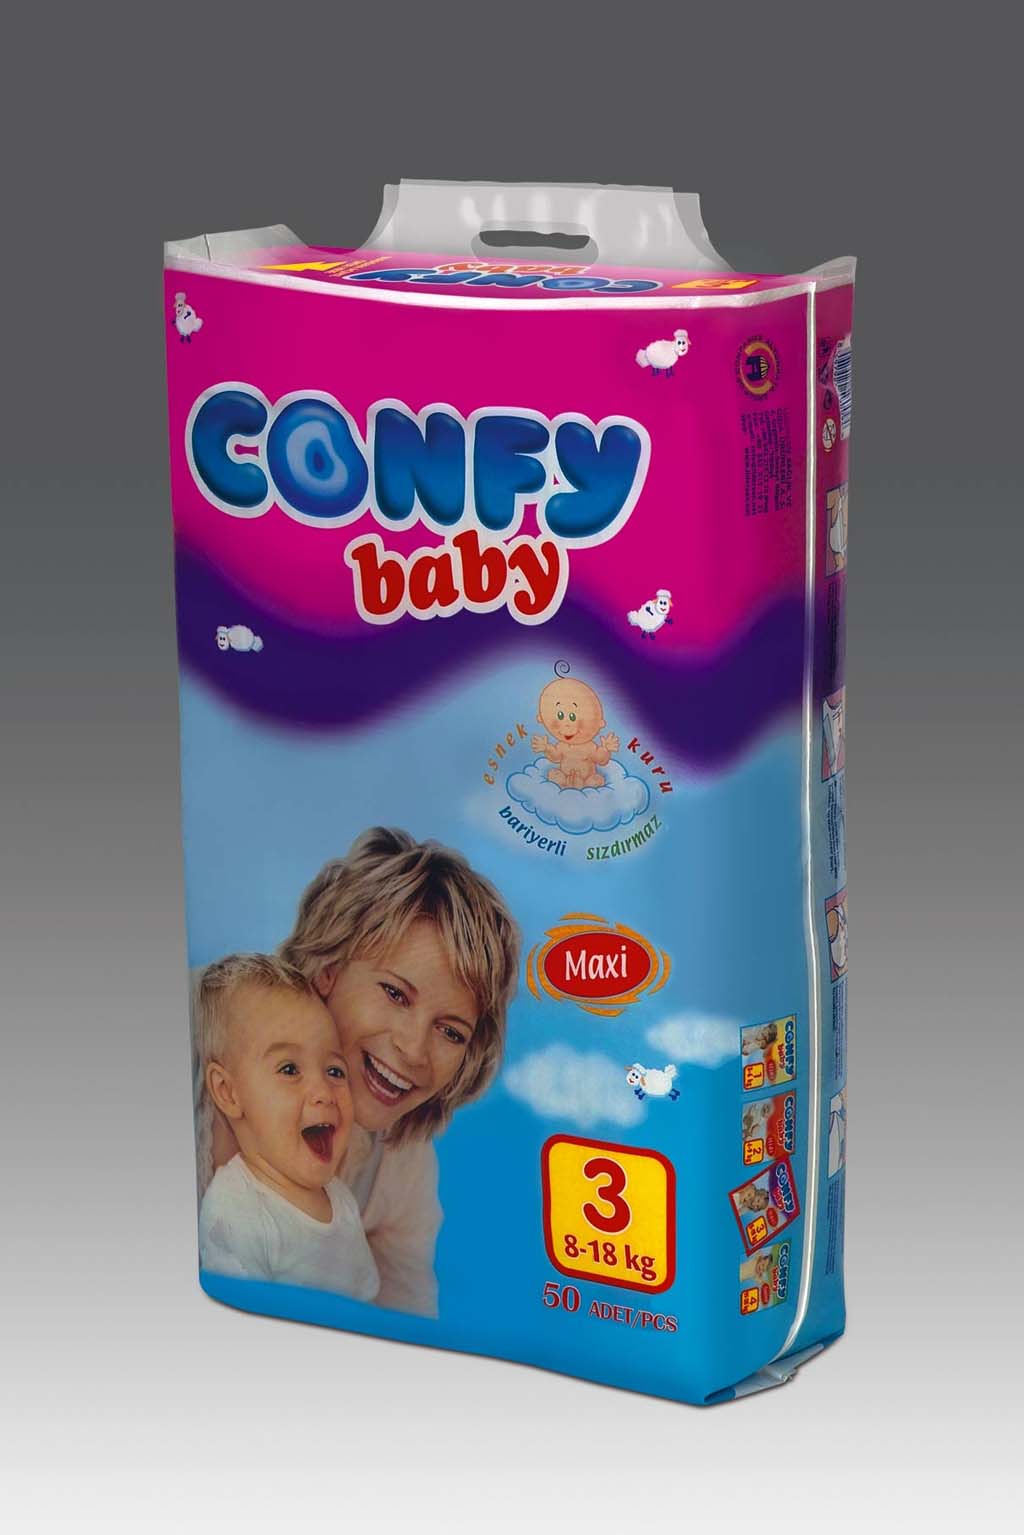  Confy Baby Diaper (Confy Baby Diaper)